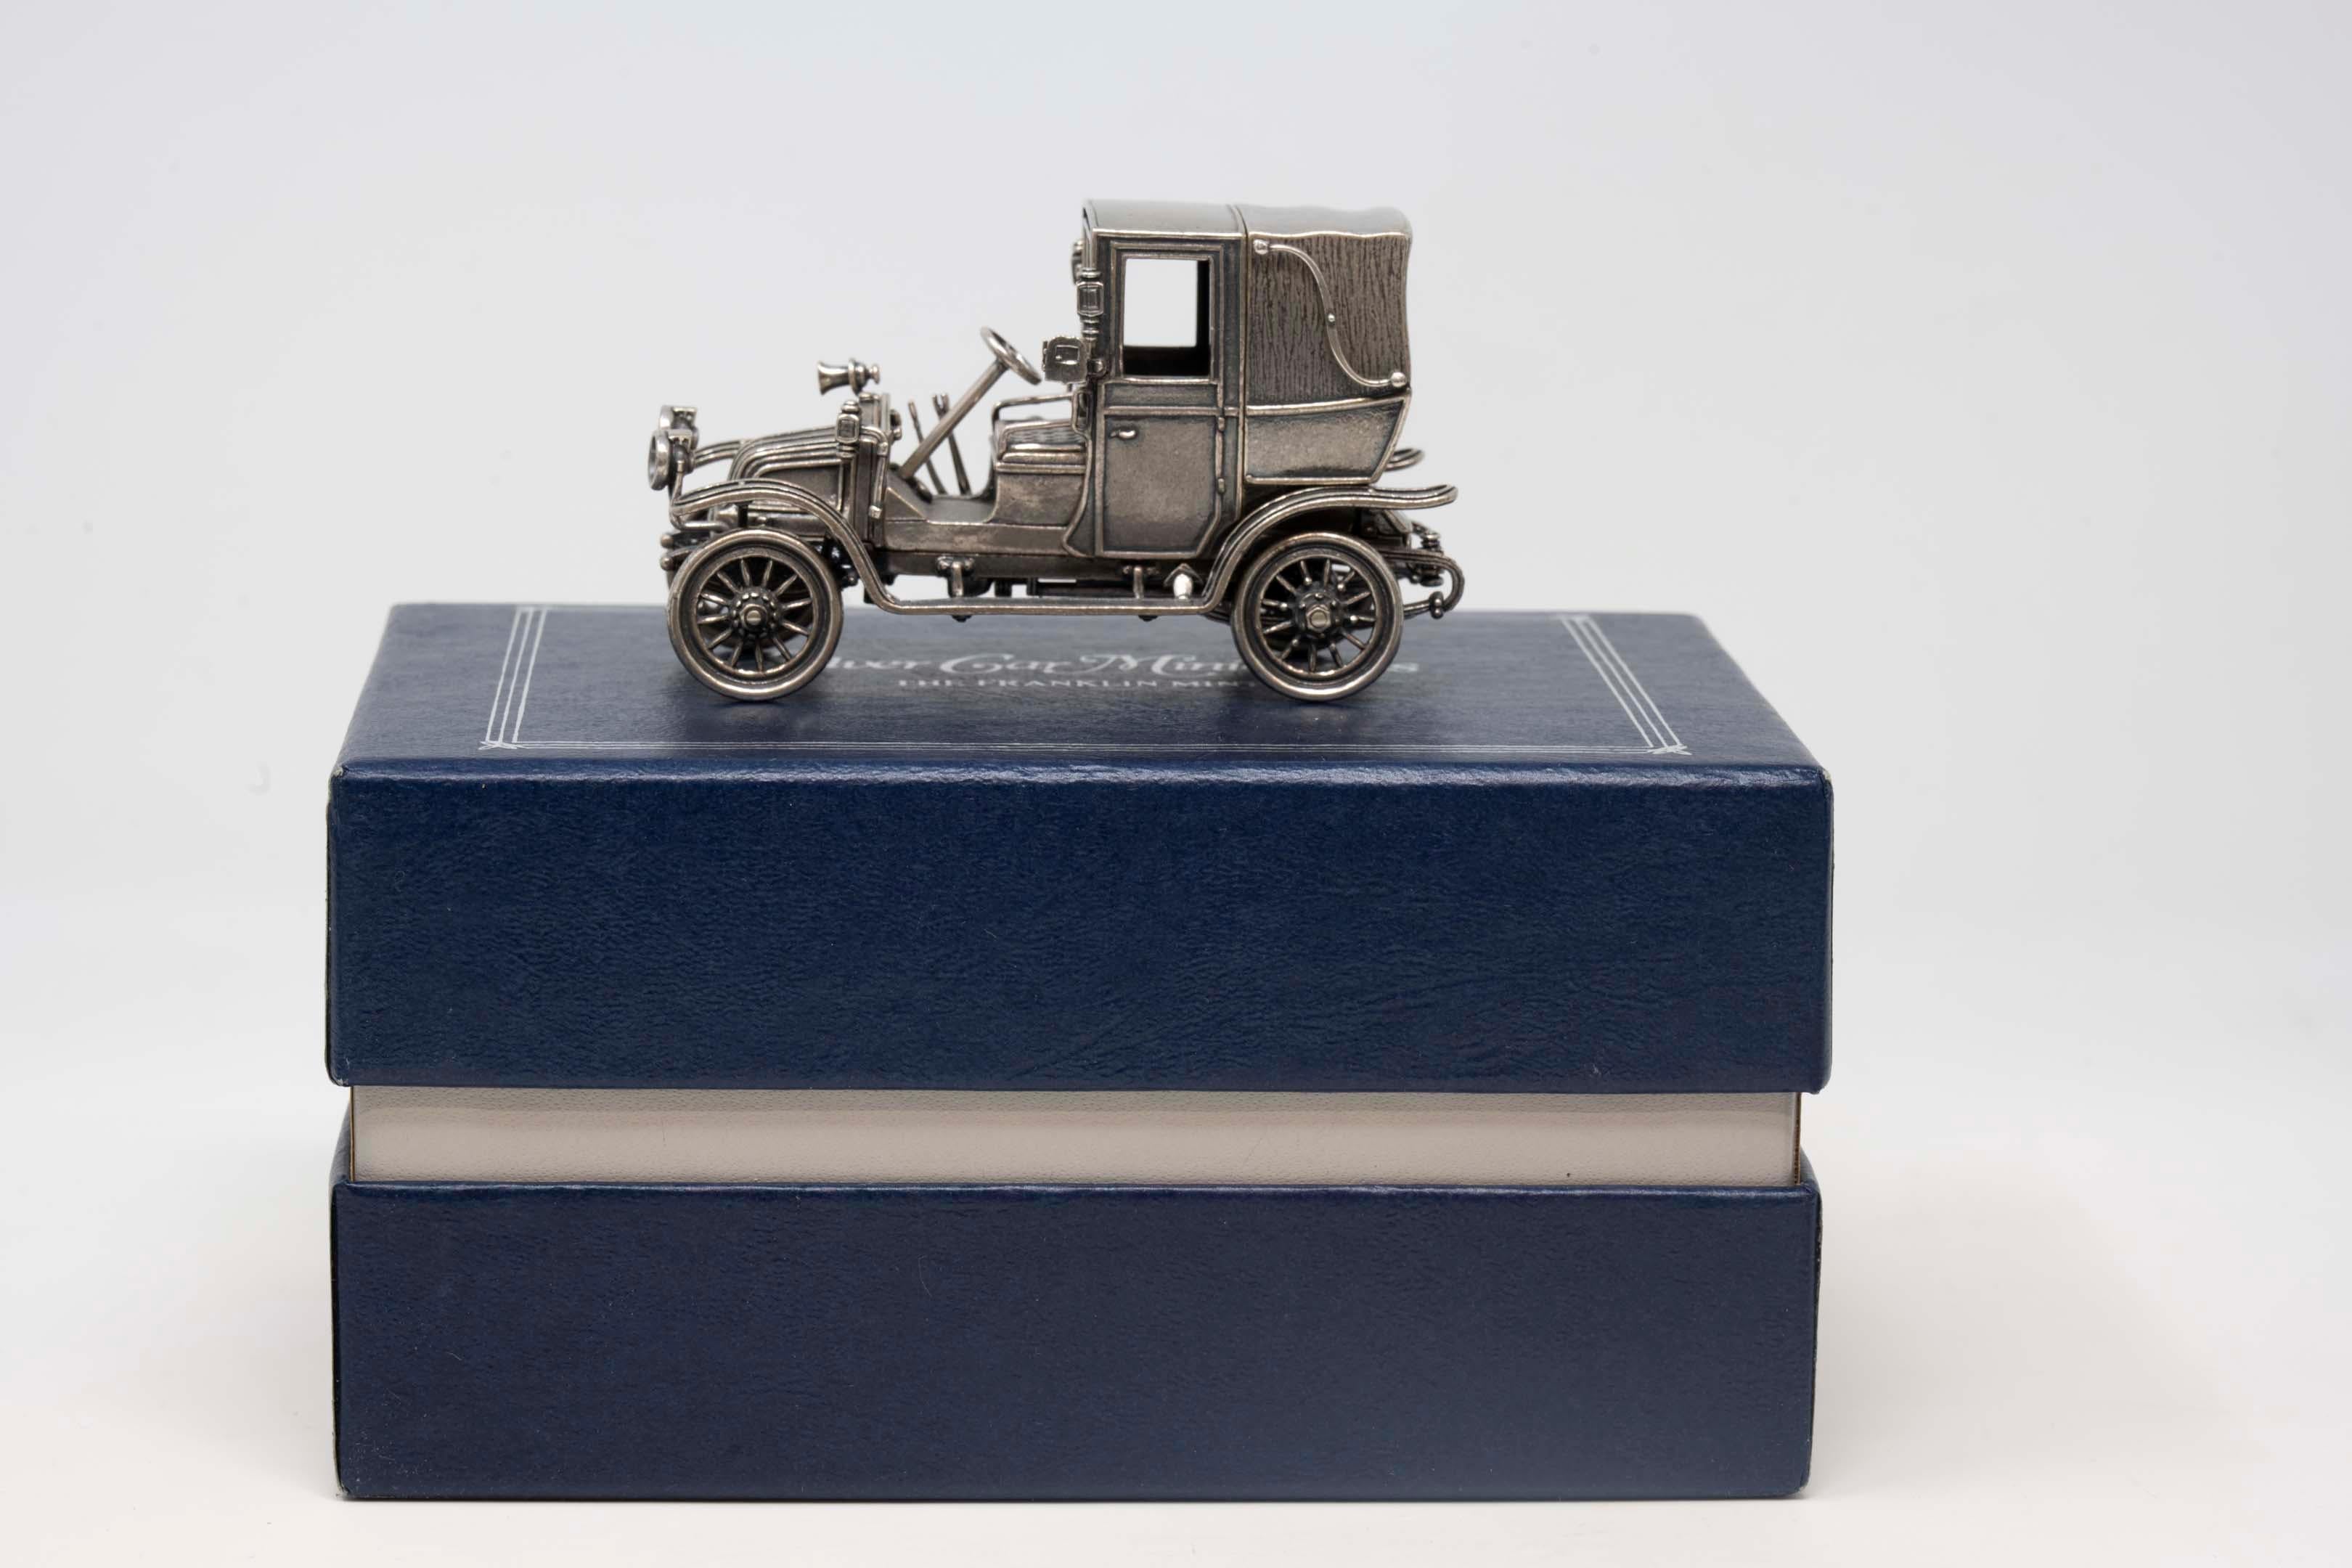 Franklin Mint 1907 Thomas Flyer sterling silver miniature car with box. Measures 3 1/2 inches long x 2 inches tall x 1 1/2 inches wide. Made in the 70s-80s, hallmarked and in good condition. Weighs 182.5 grams.
